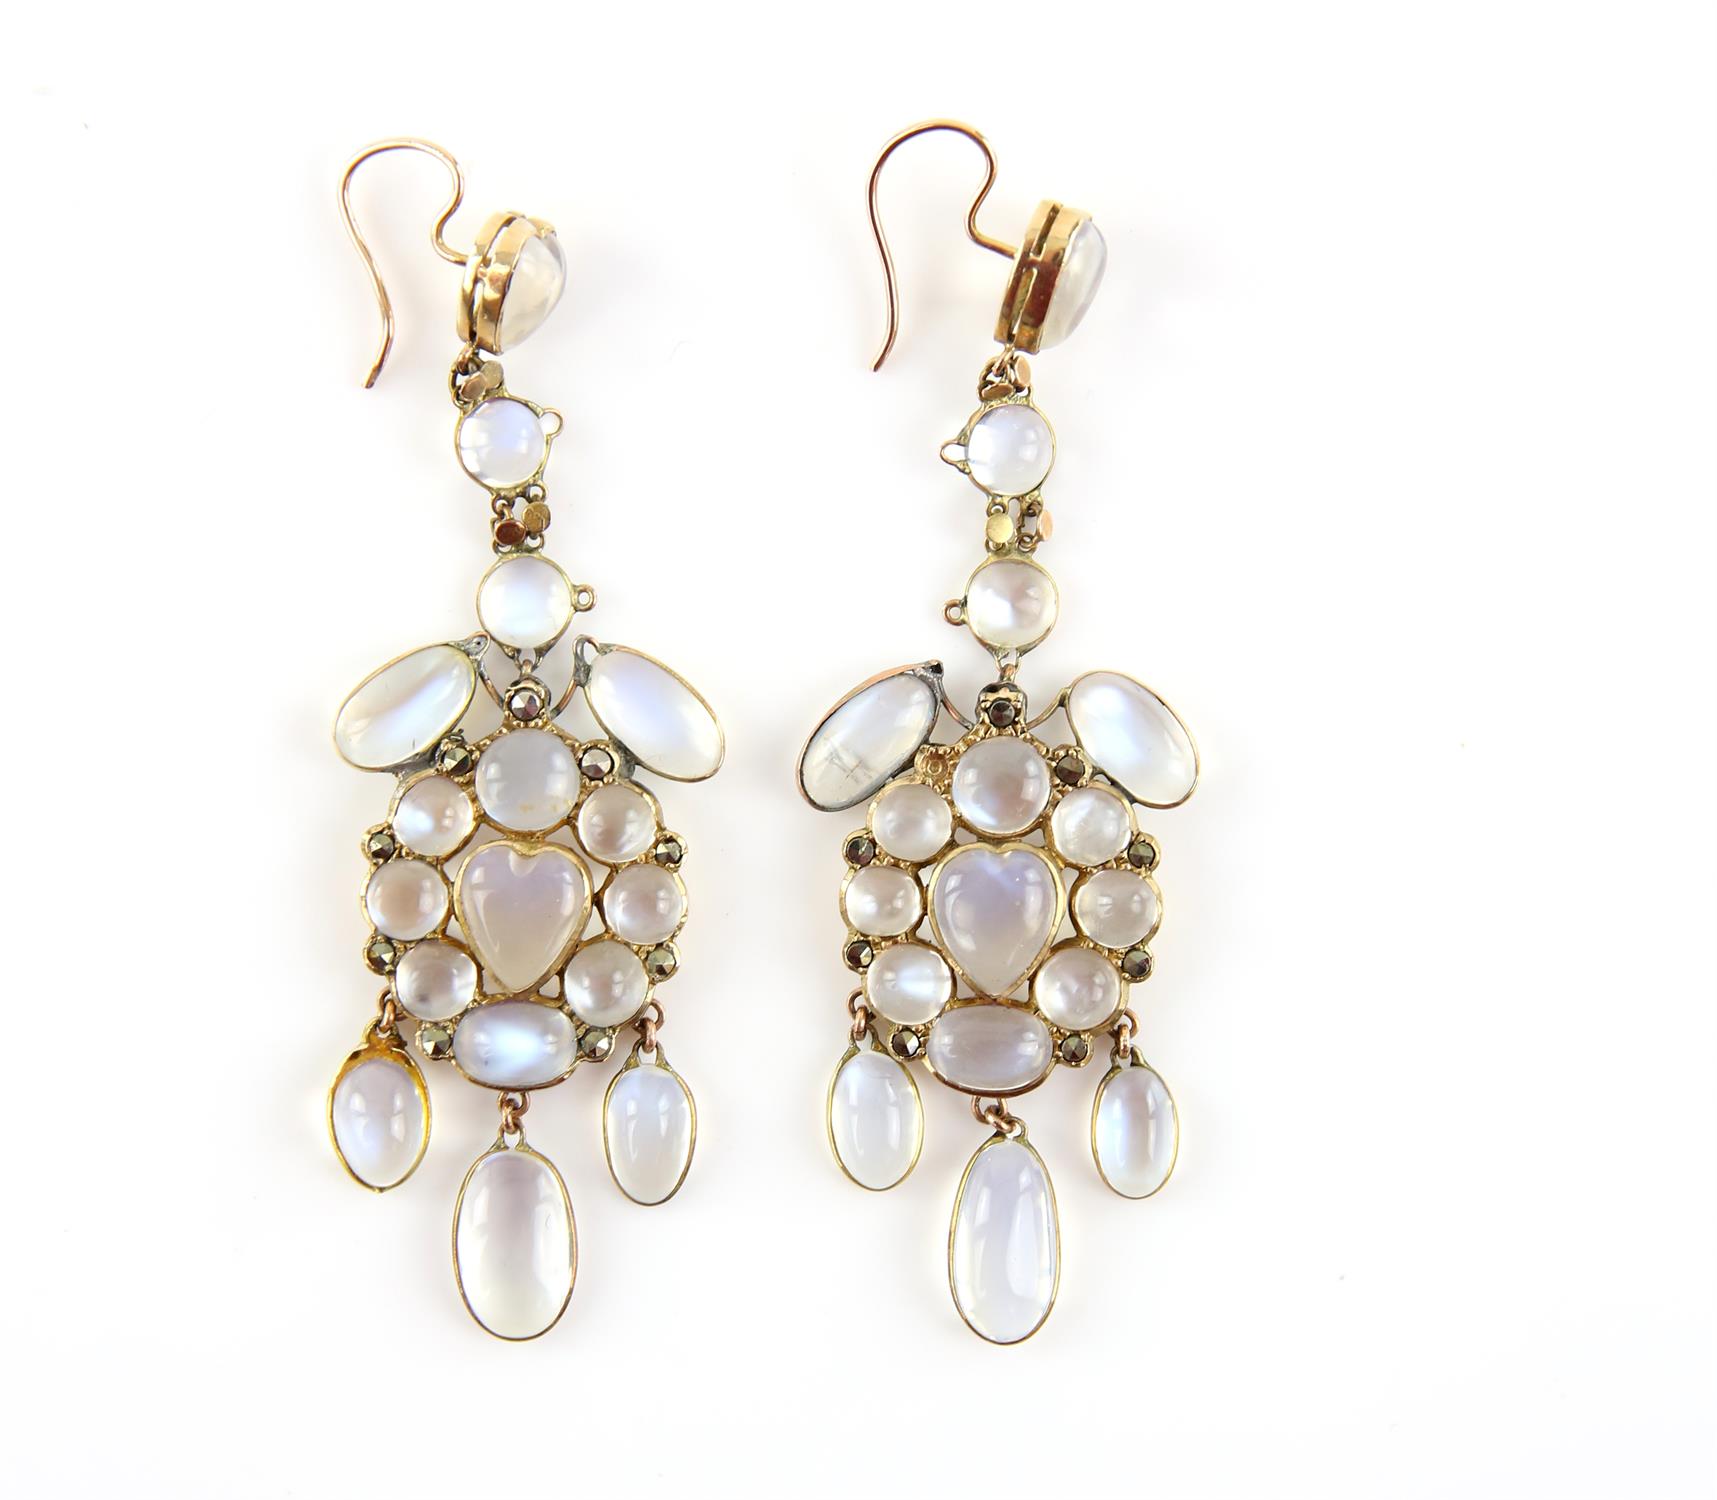 A pair of moonstone chandelier earrings, set with round, oval and heart shaped cabochon cut